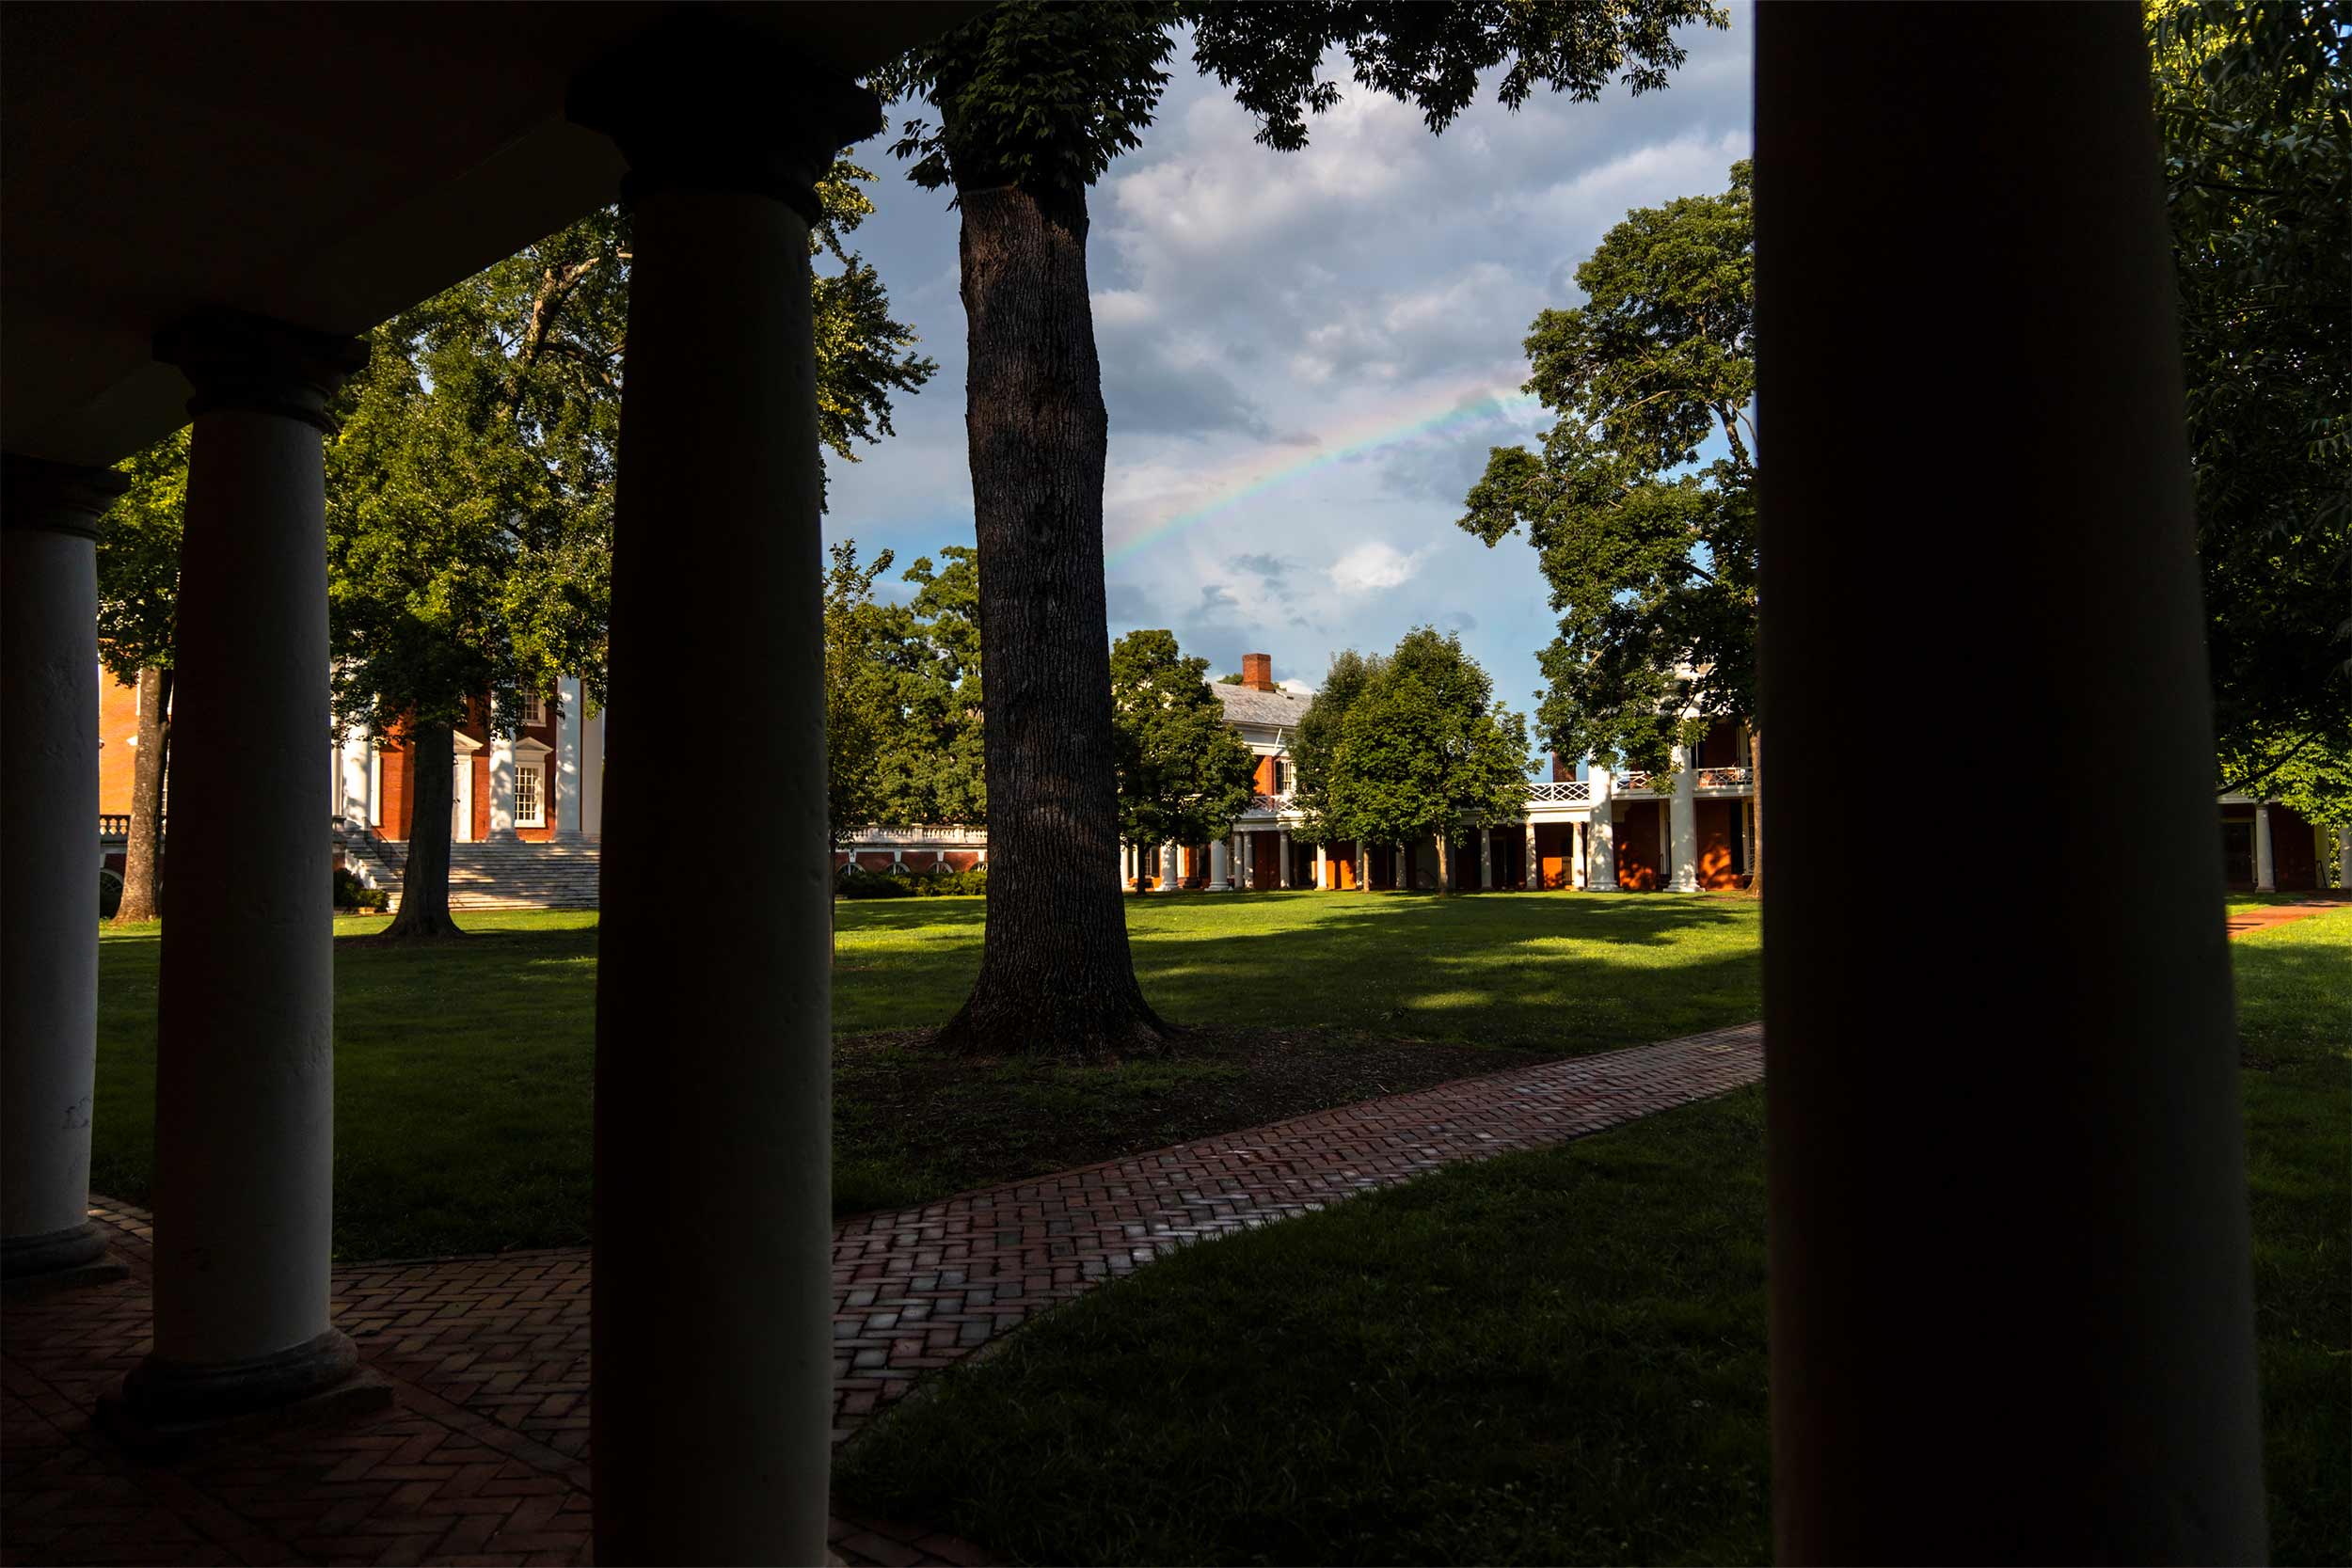 The Lawn seen through columns and trees. A rainbow is seen in the sky in the distance. 